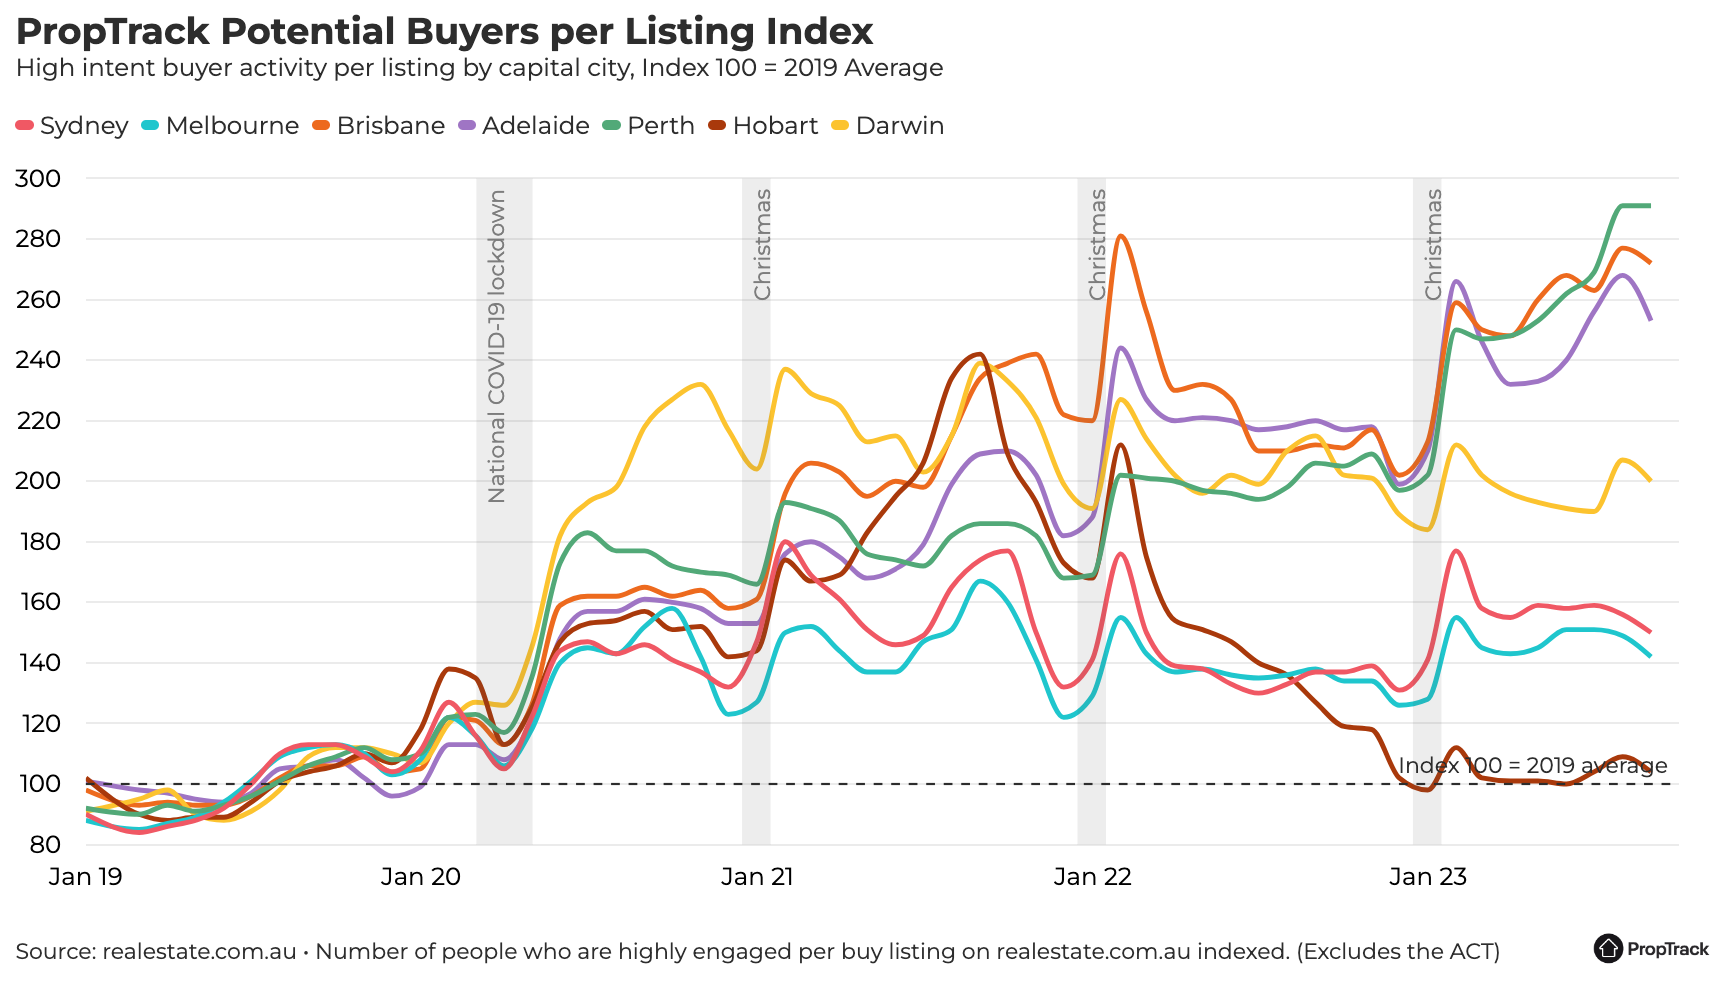 Chart showing PropTrack Potential Buyers per Listing Index